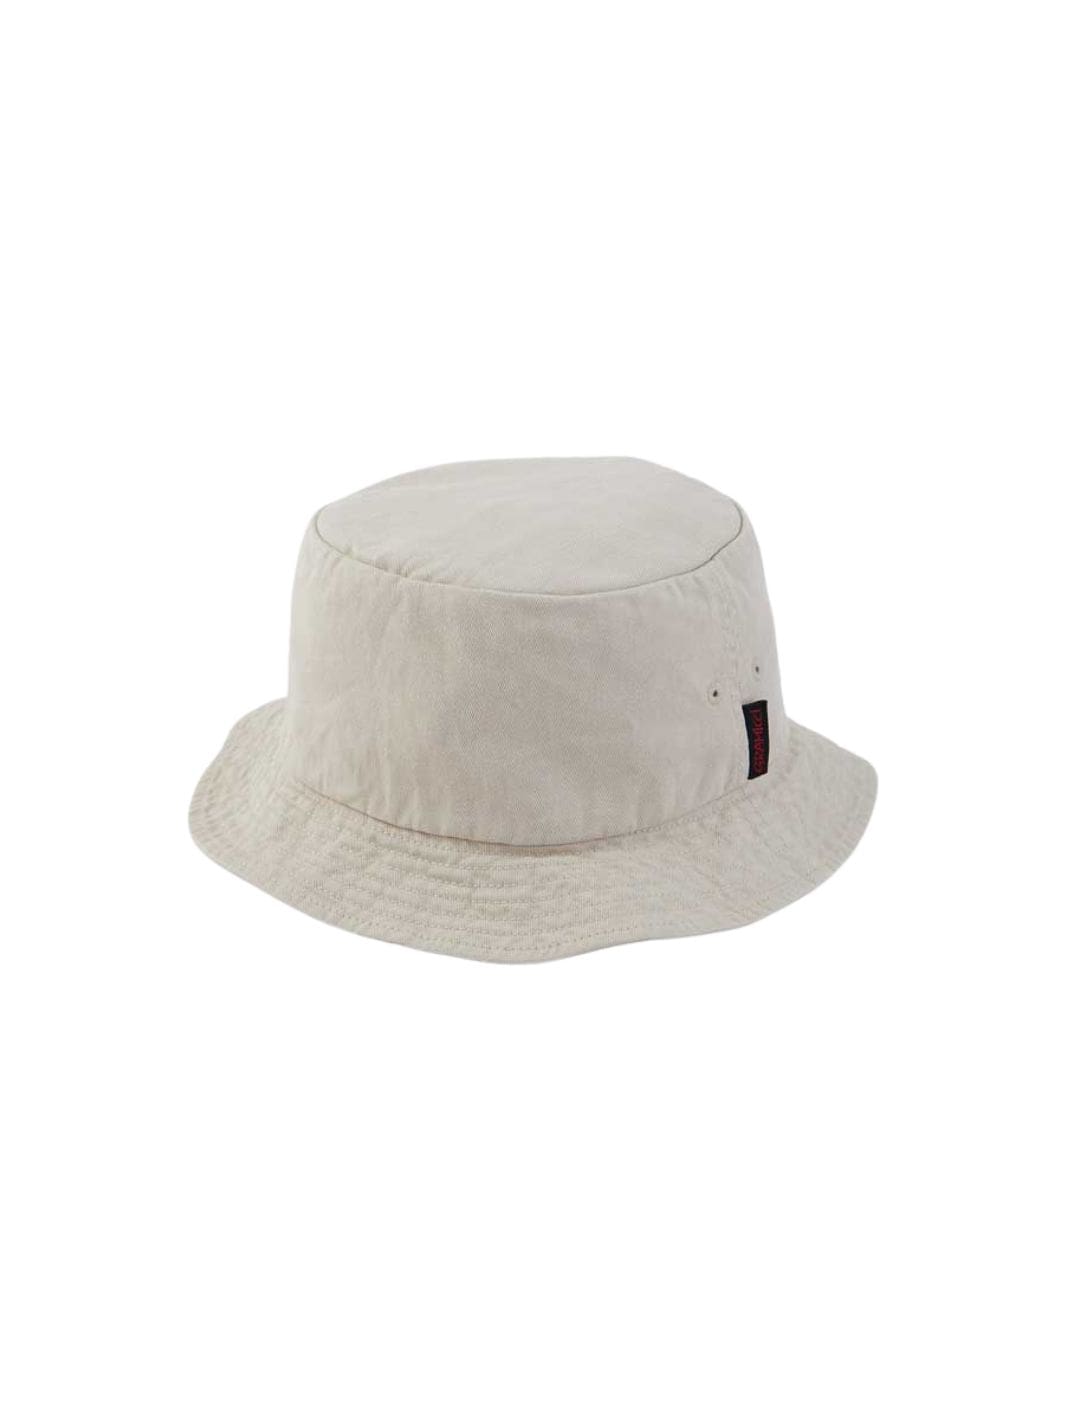 Gramicci Accessories Packable Bucket Hat Chino